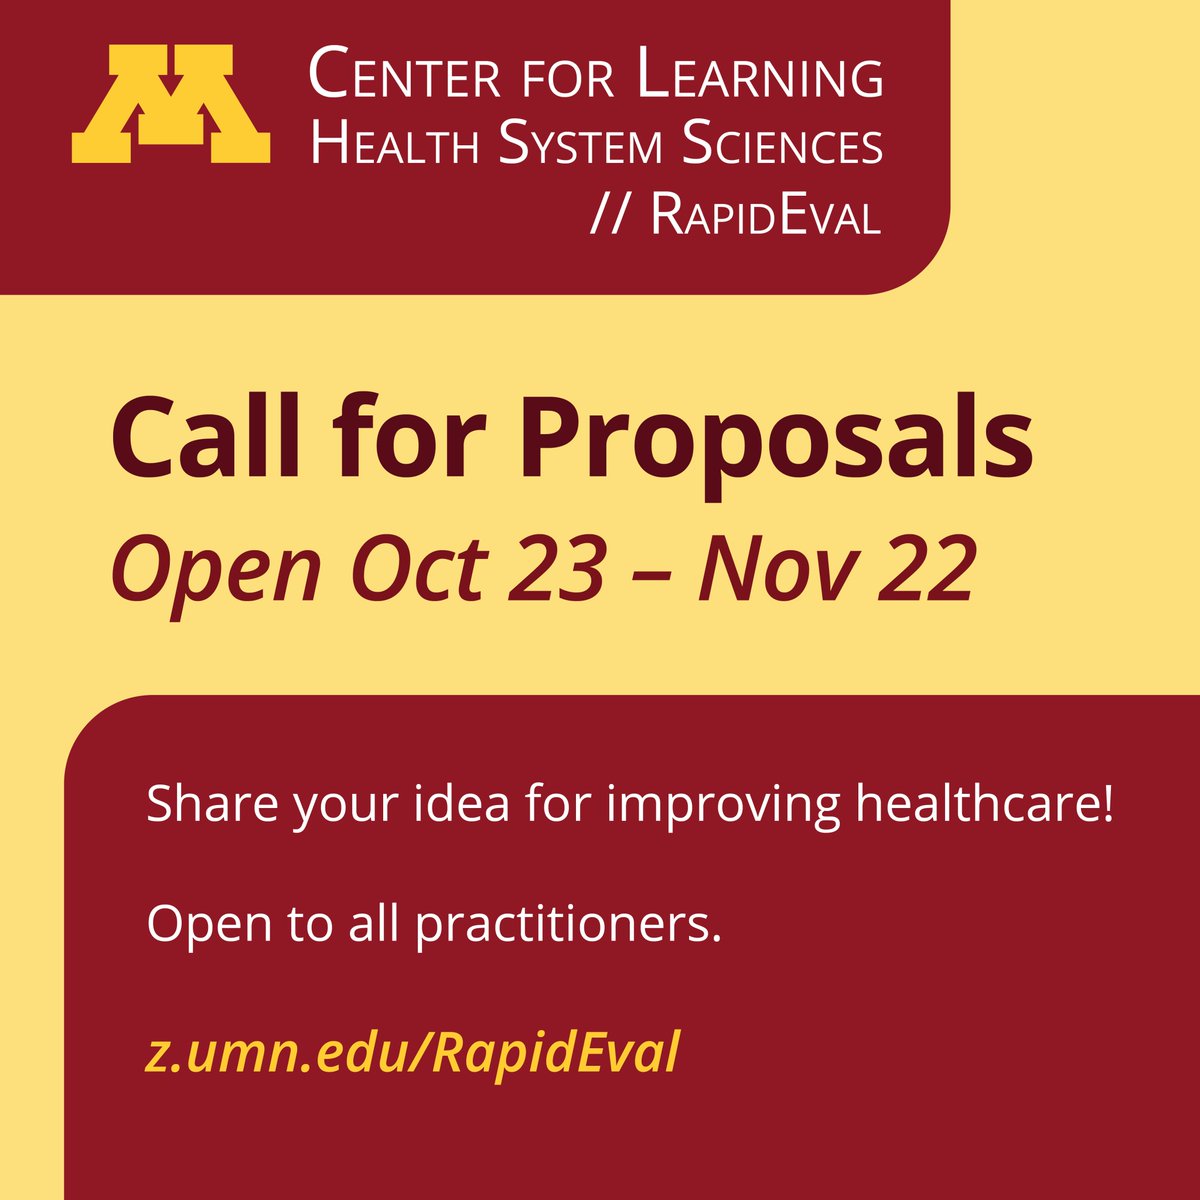 Our RapidEval program provides mentorship, research design expertise, statistical analysis, and other support for accepted projects. Submit your project proposal by November 22, 5pm CST. z.umn.edu/RapidEval